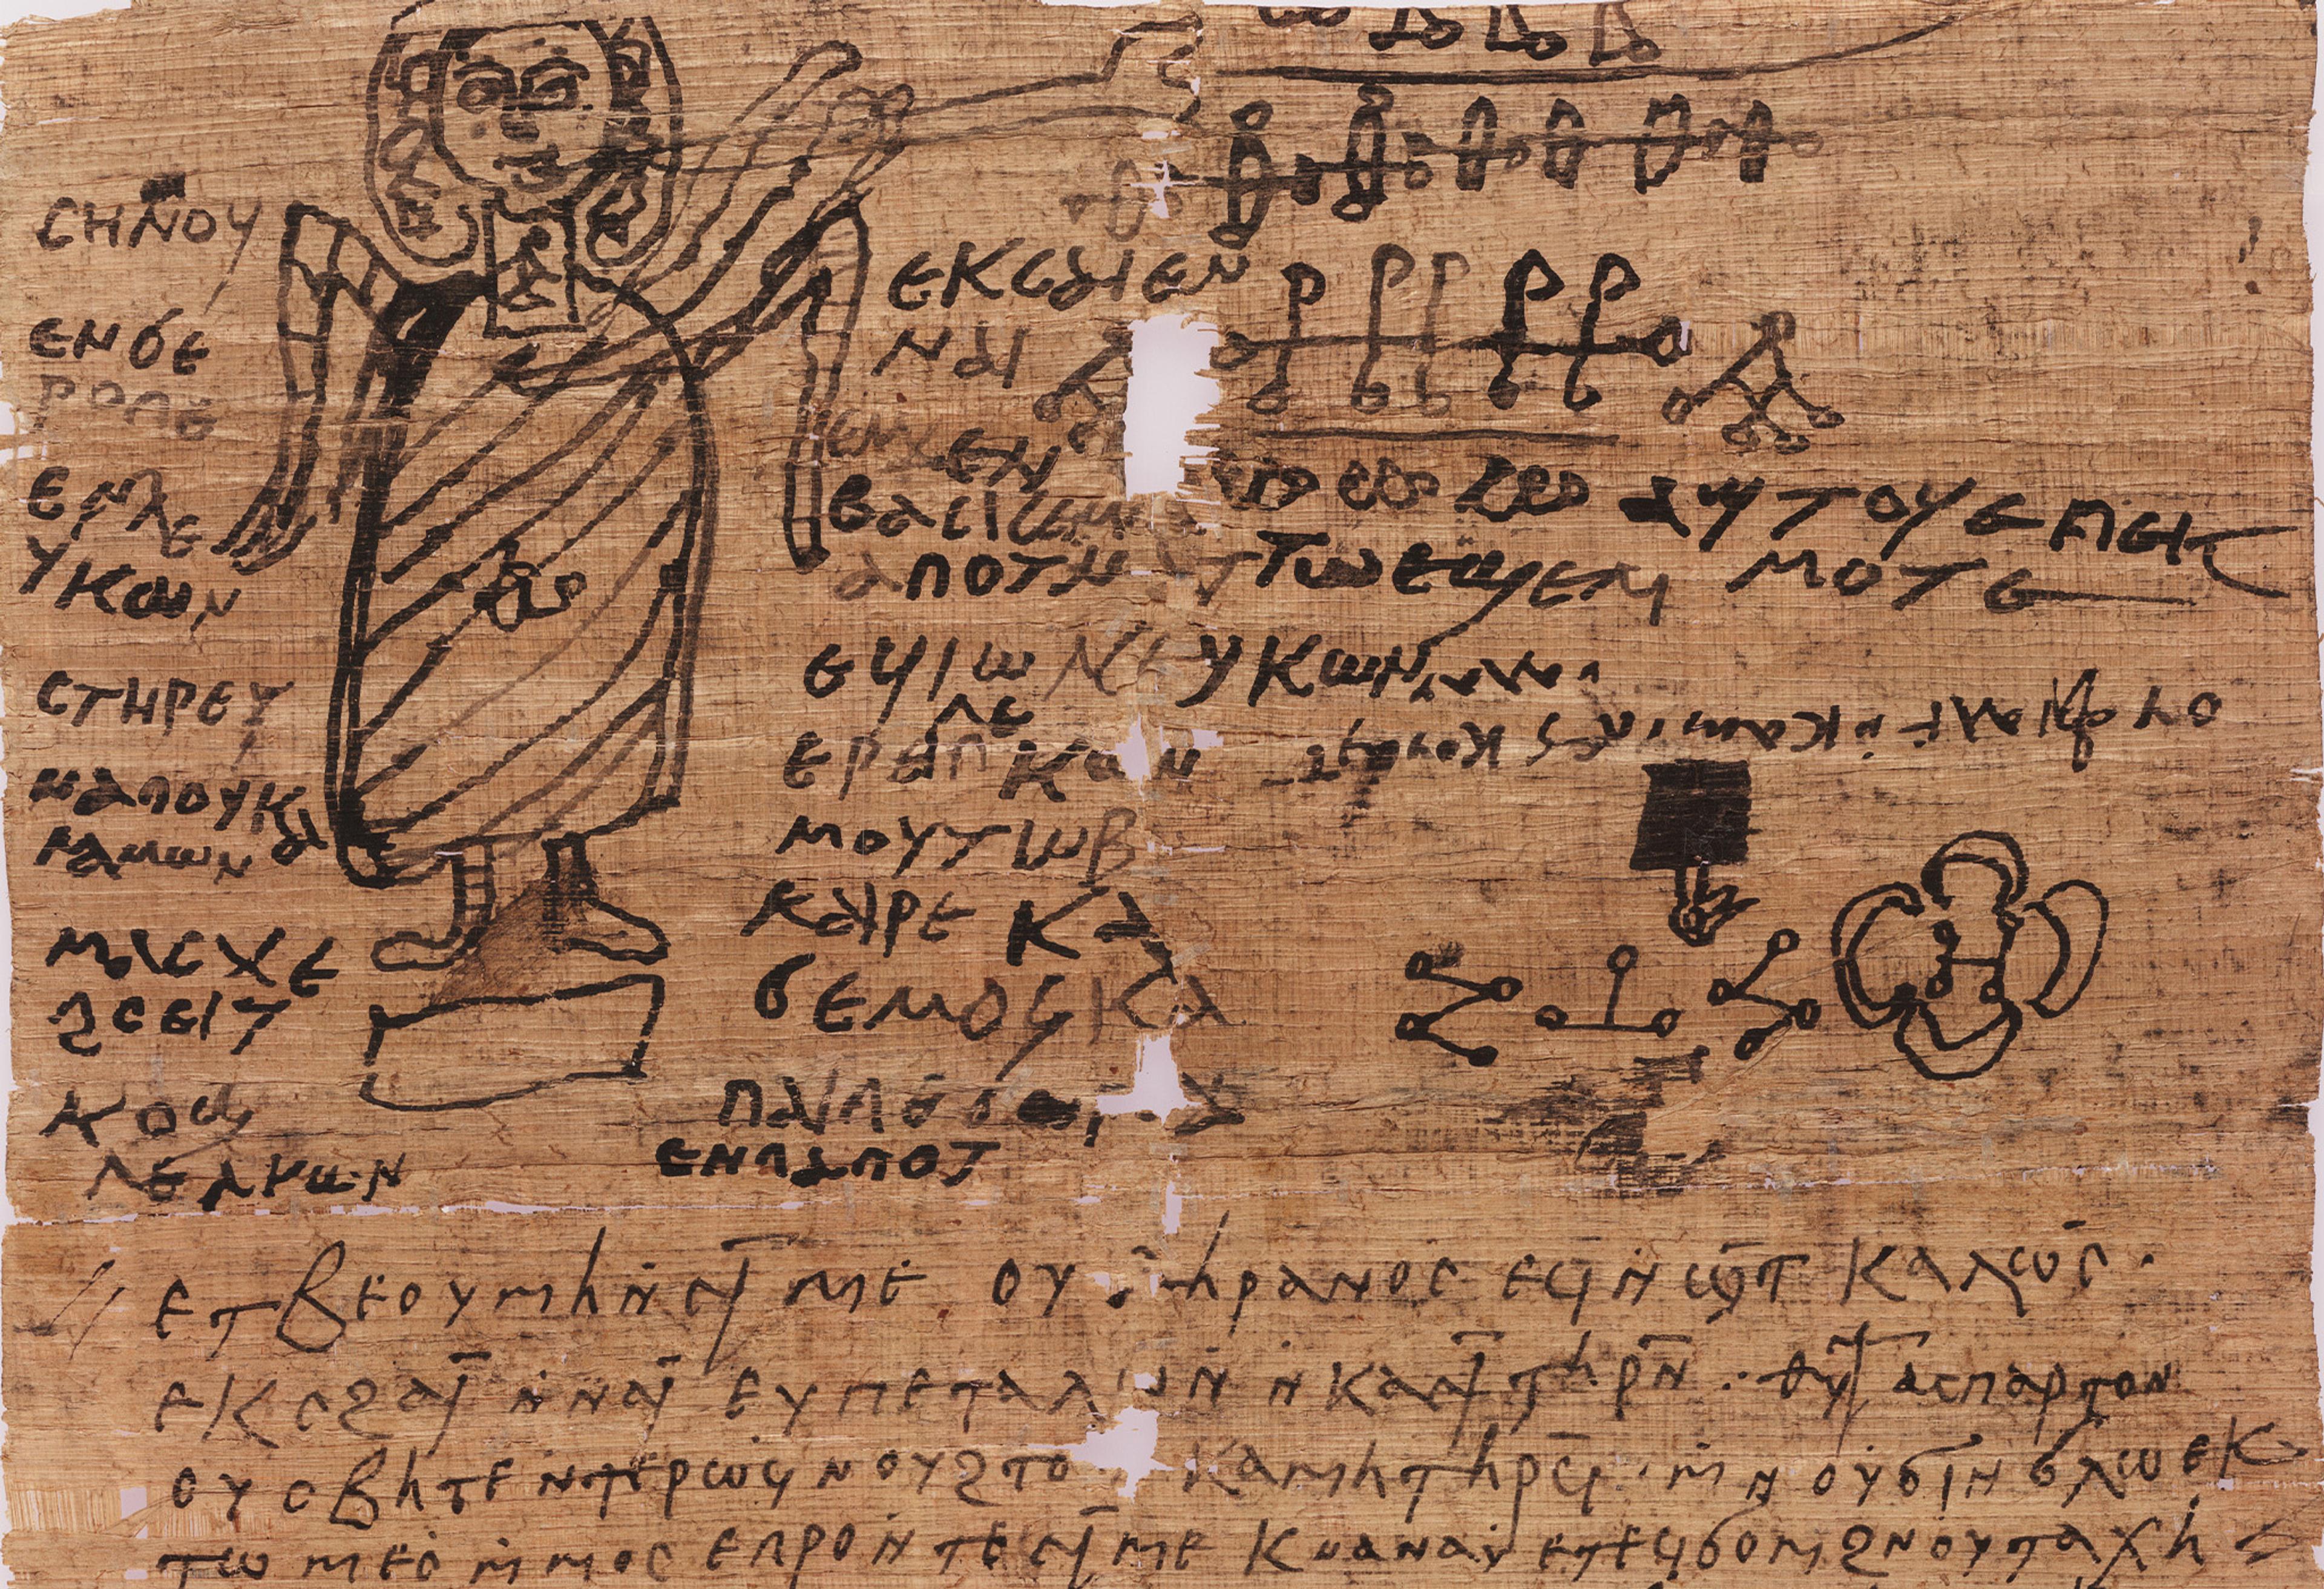 Brown papyrus paper with black ink writing on it with an image of a figure on the left. The paper is old and very torn. 